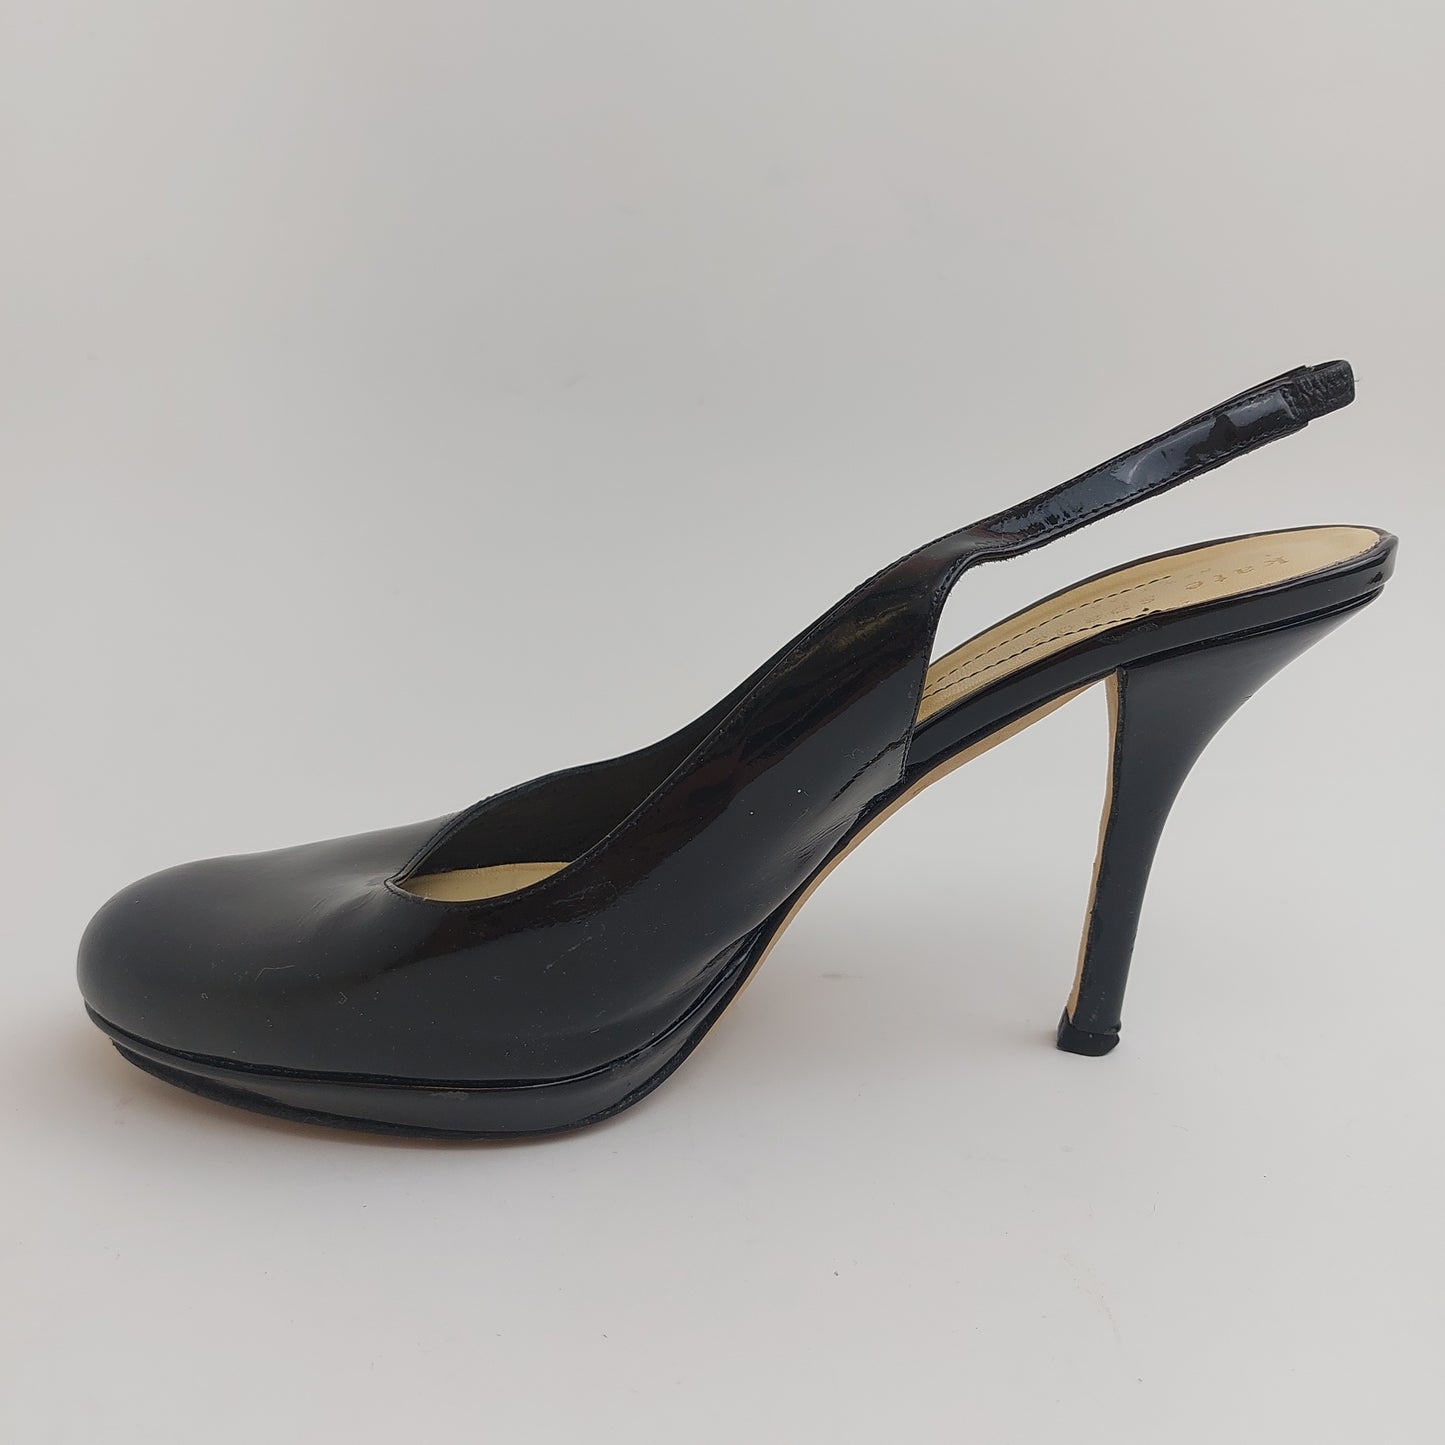 Kate Spade New York Patent Leather Sling back Heels 7.5